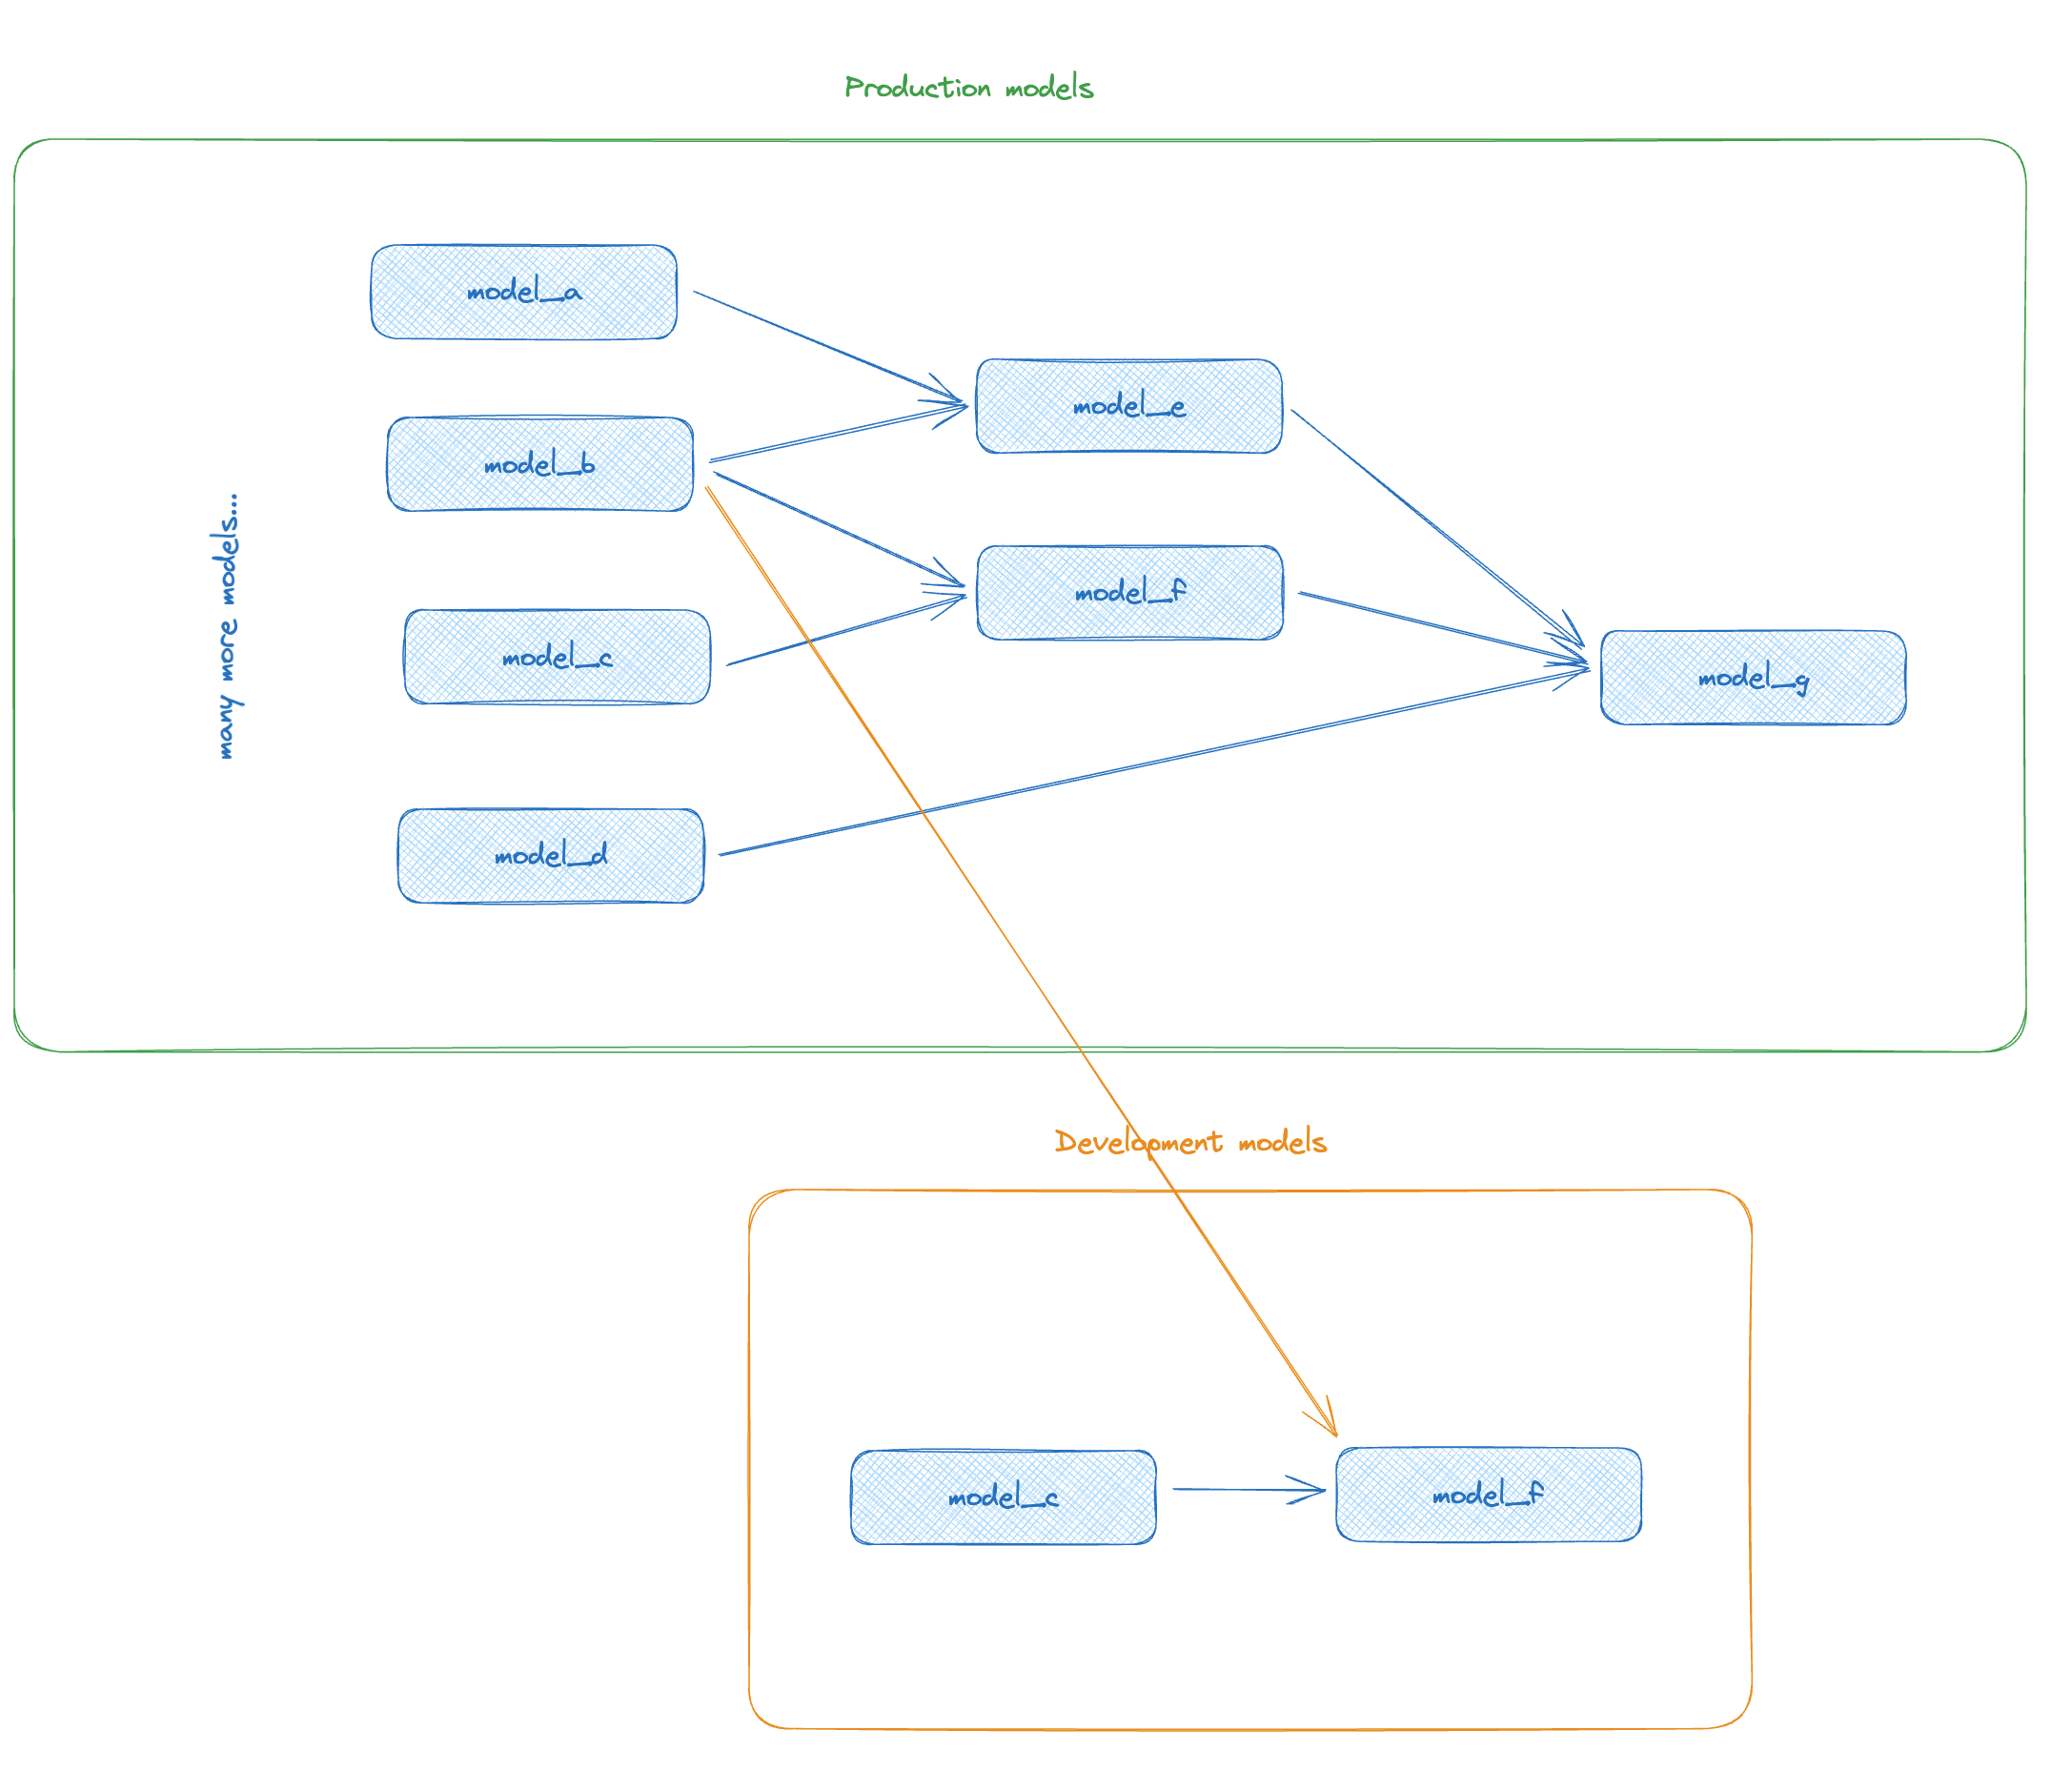 With a development version of model_a in our dev schema, dbt will preferentially use that version instead of deferring